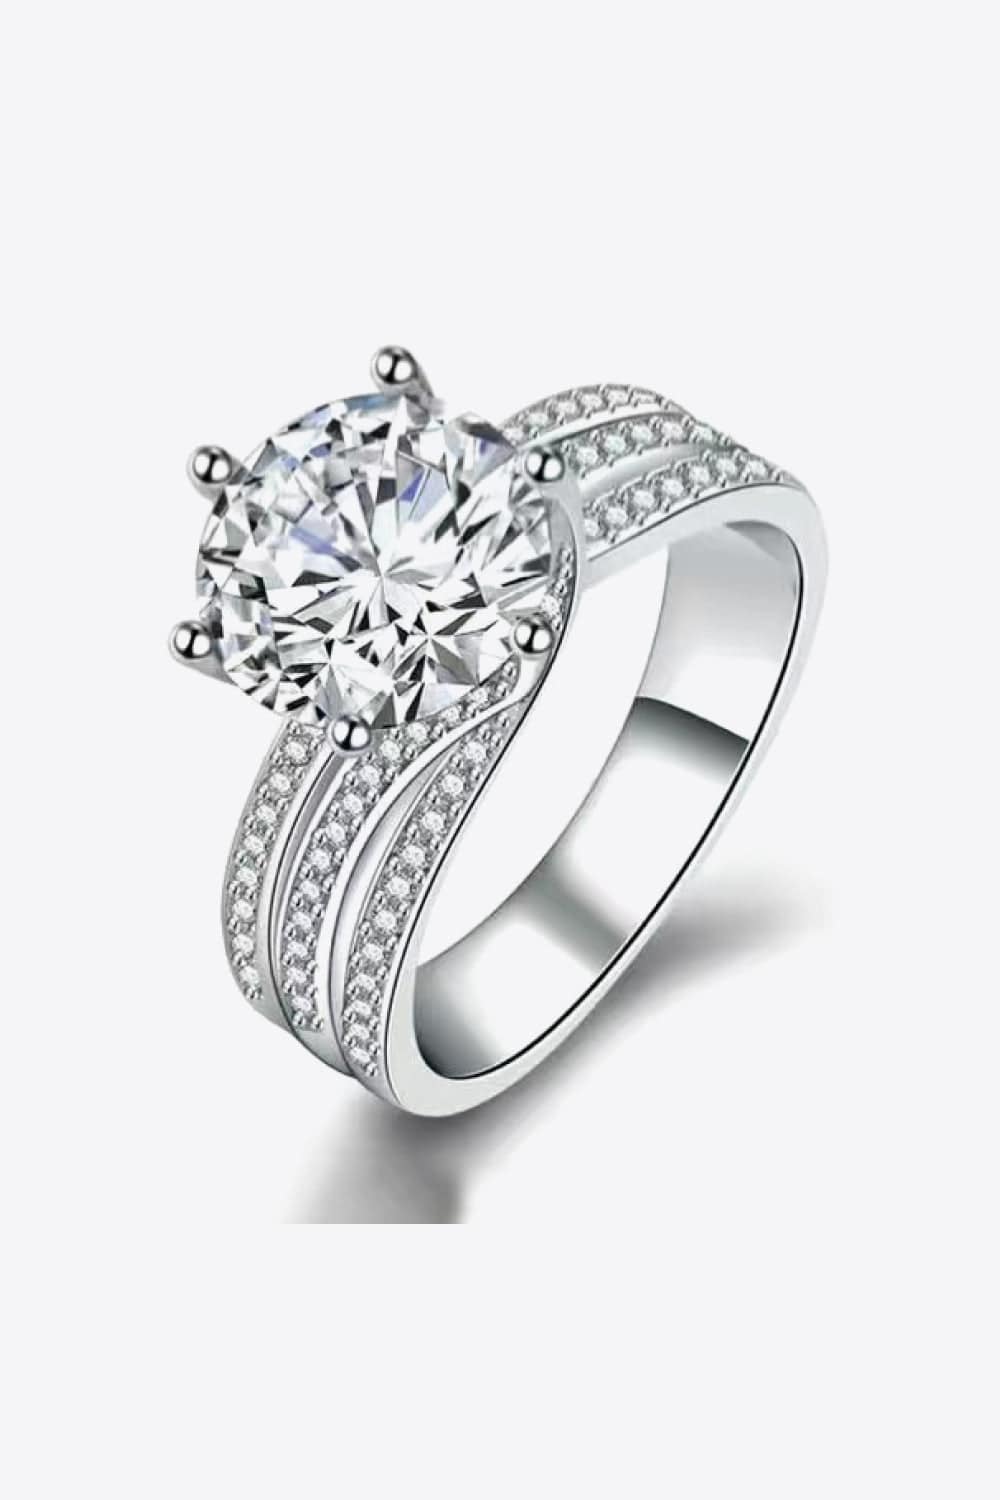 "Everlasting Love - Indulge in the Romance of Our 3 Carat Moissanite Three-Layer Ring and Capture Timeless Beauty" - Guy Christopher